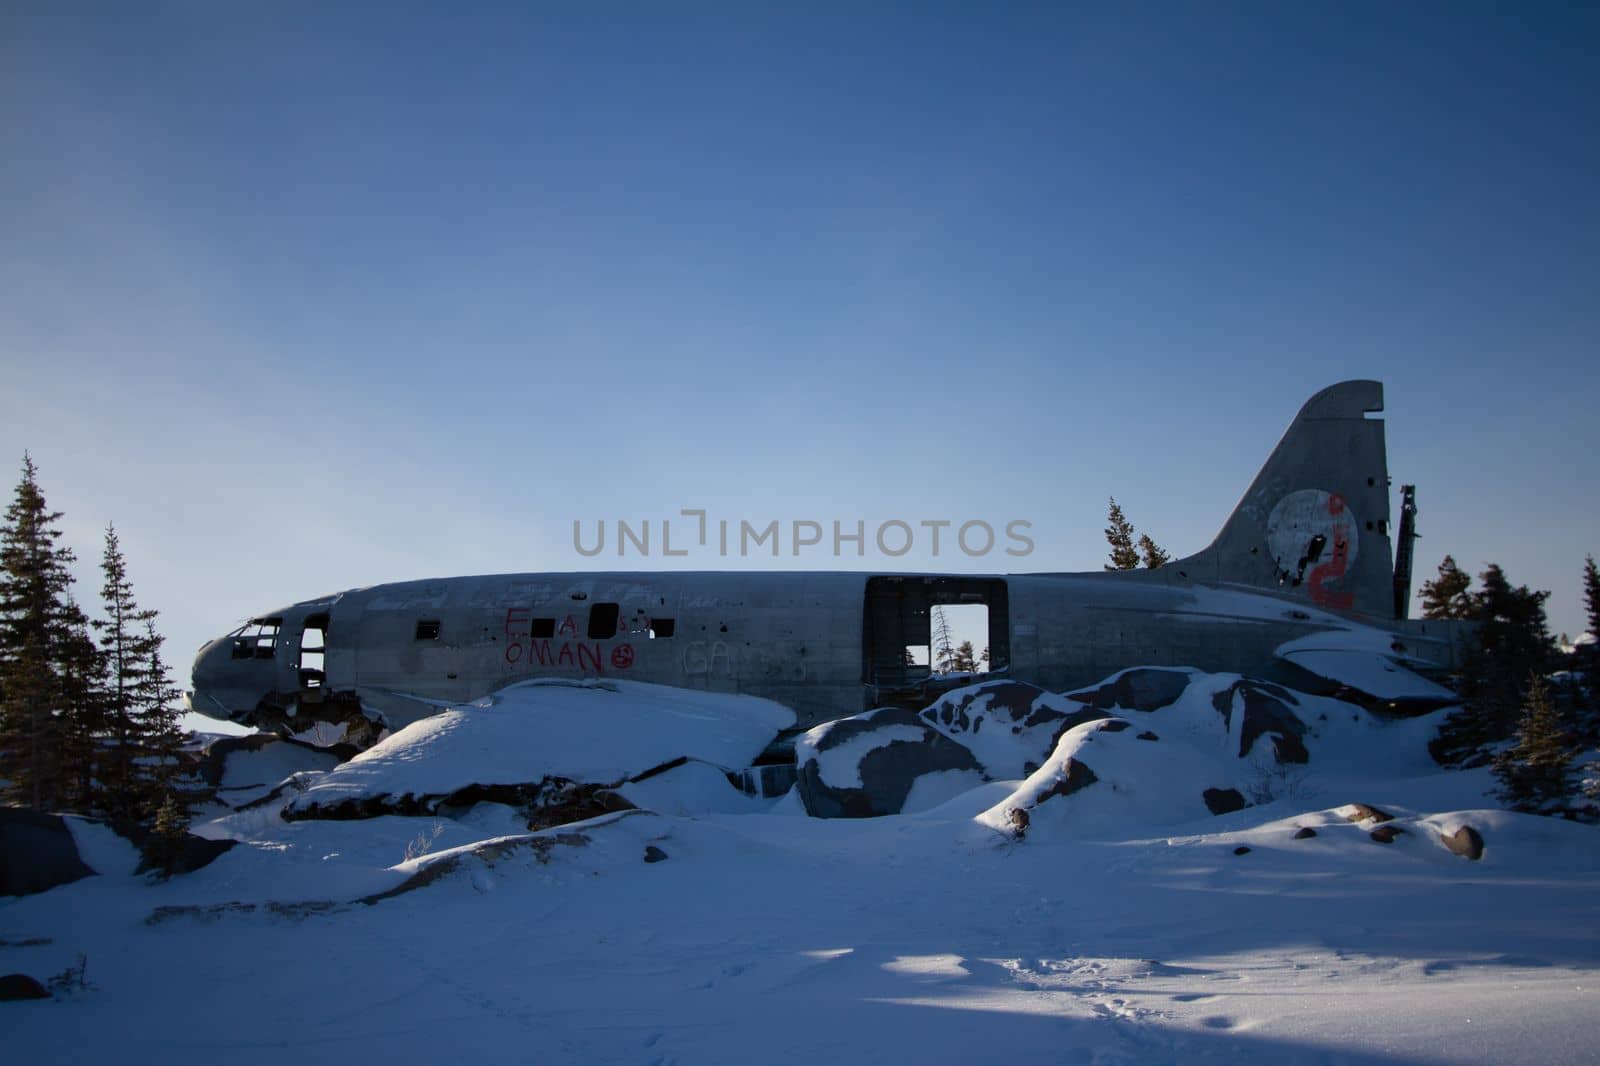 Miss Piggy Plane wreck in Churchill, Manitoba with blue background in frame with snow on rocks in front of crash landing site.